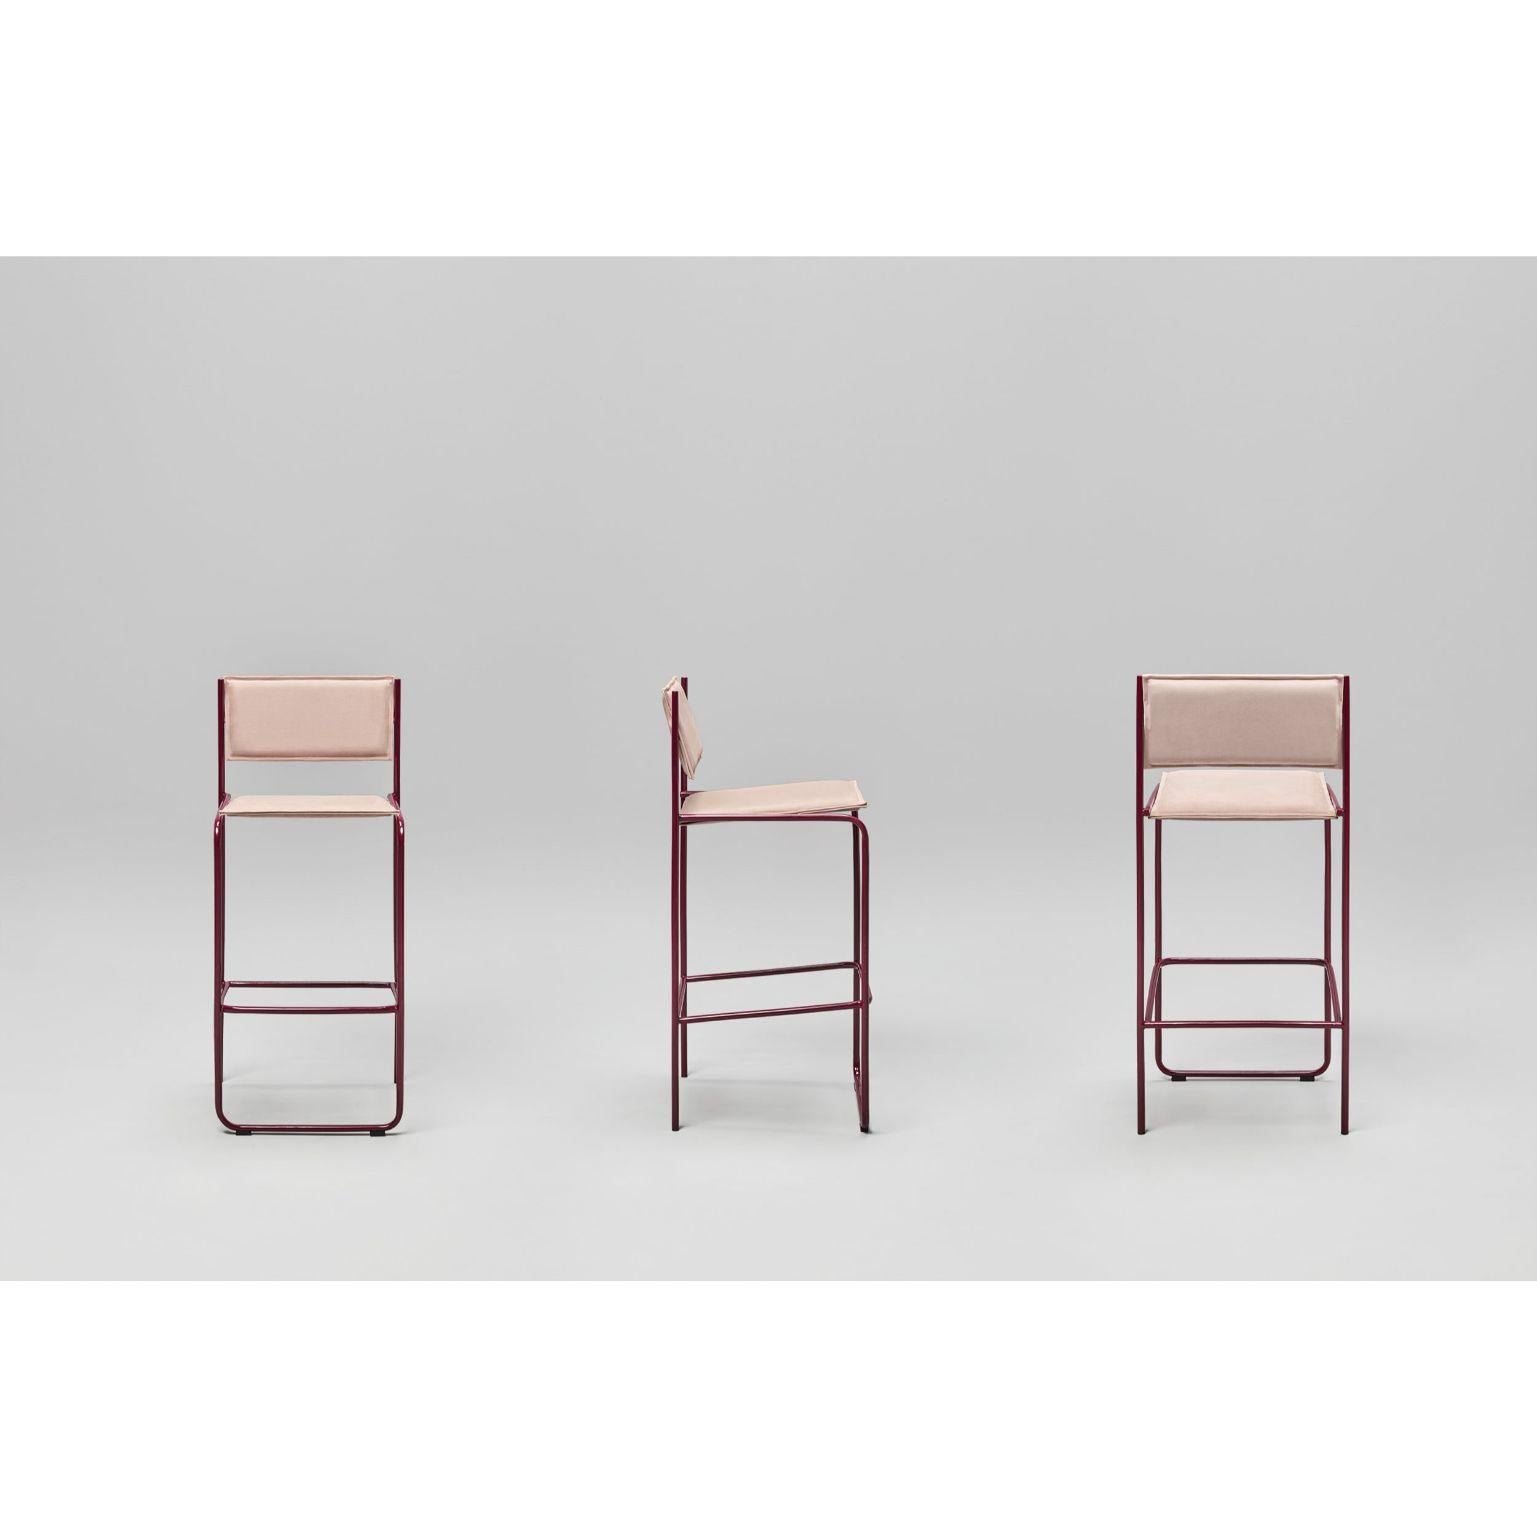 Pair of Trampolín stool by Pepe Albargues
Dimensions: W47, D49, H103, Seat76
Materials: Chrome plated or painted iron structure
Foam CMHR (high resilience and flame retardant) for all our cushion filling systems
Removable backrest and seat